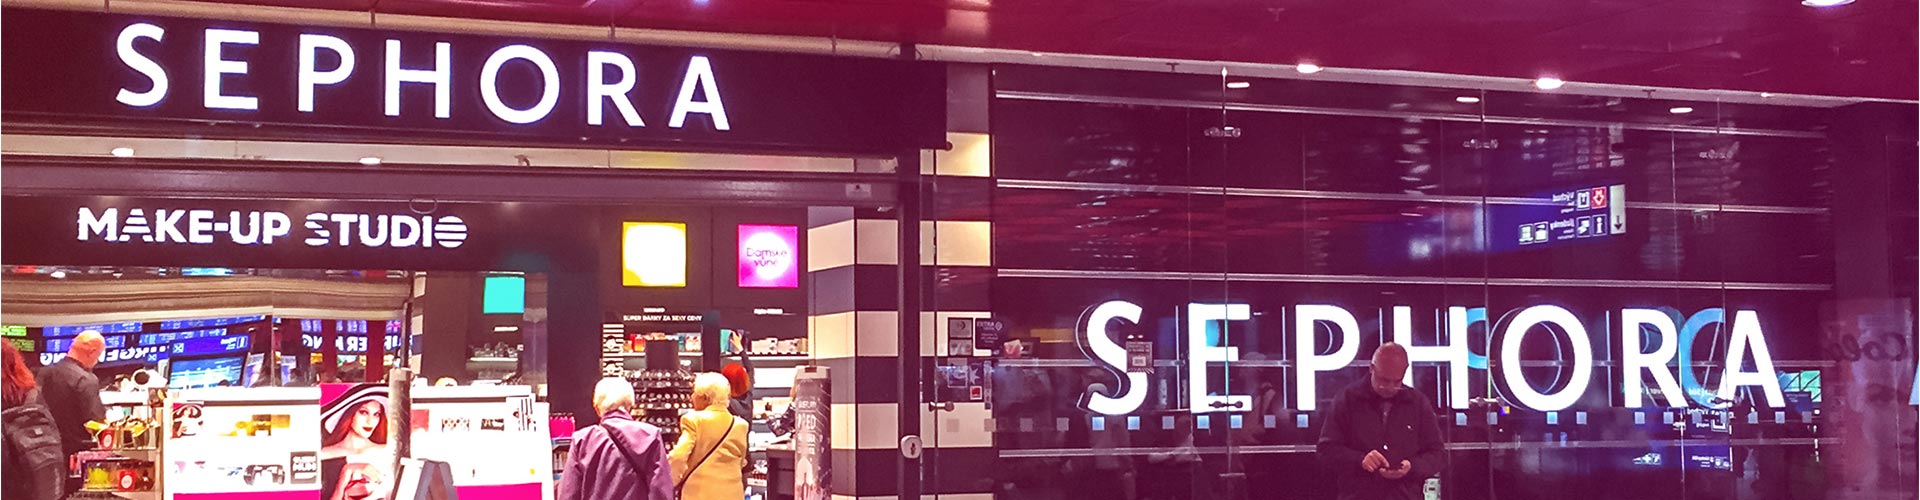 Blog banner featuring storefront entrance of Sephora